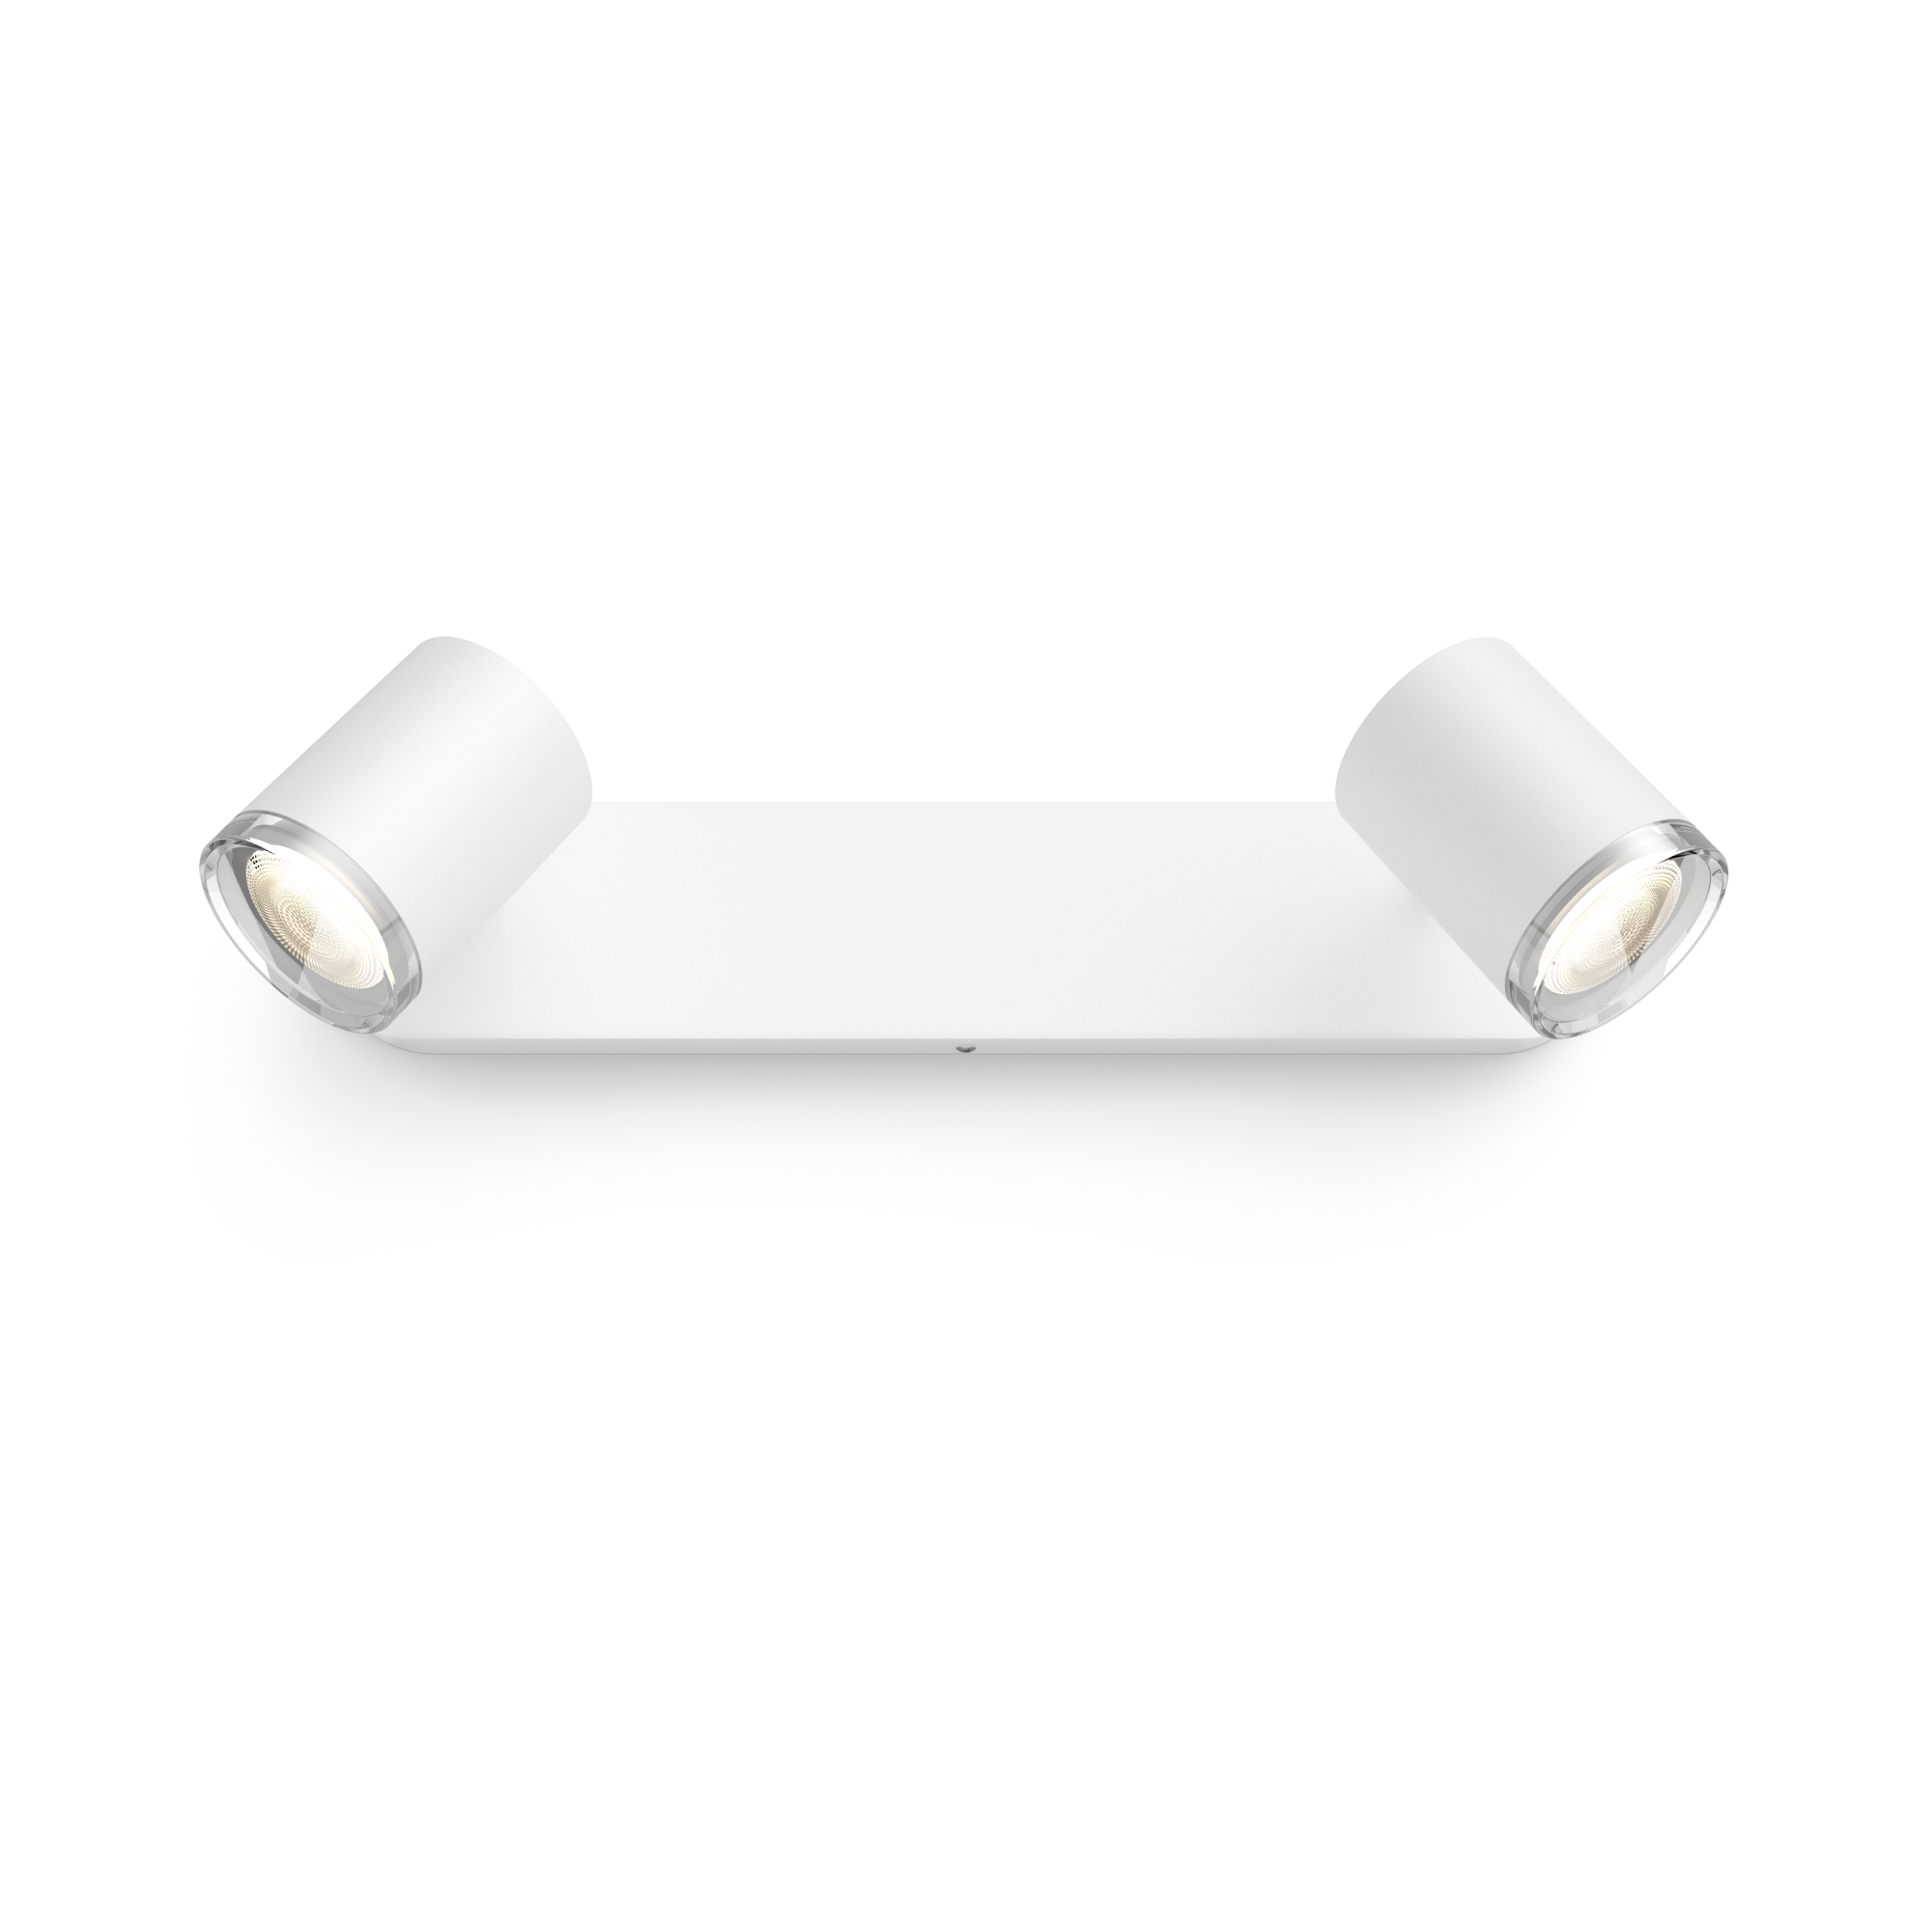 Spot Philips Hue Adore LED Spot Double-Flamed 2x 350lm alb incl. Buton Dimmer